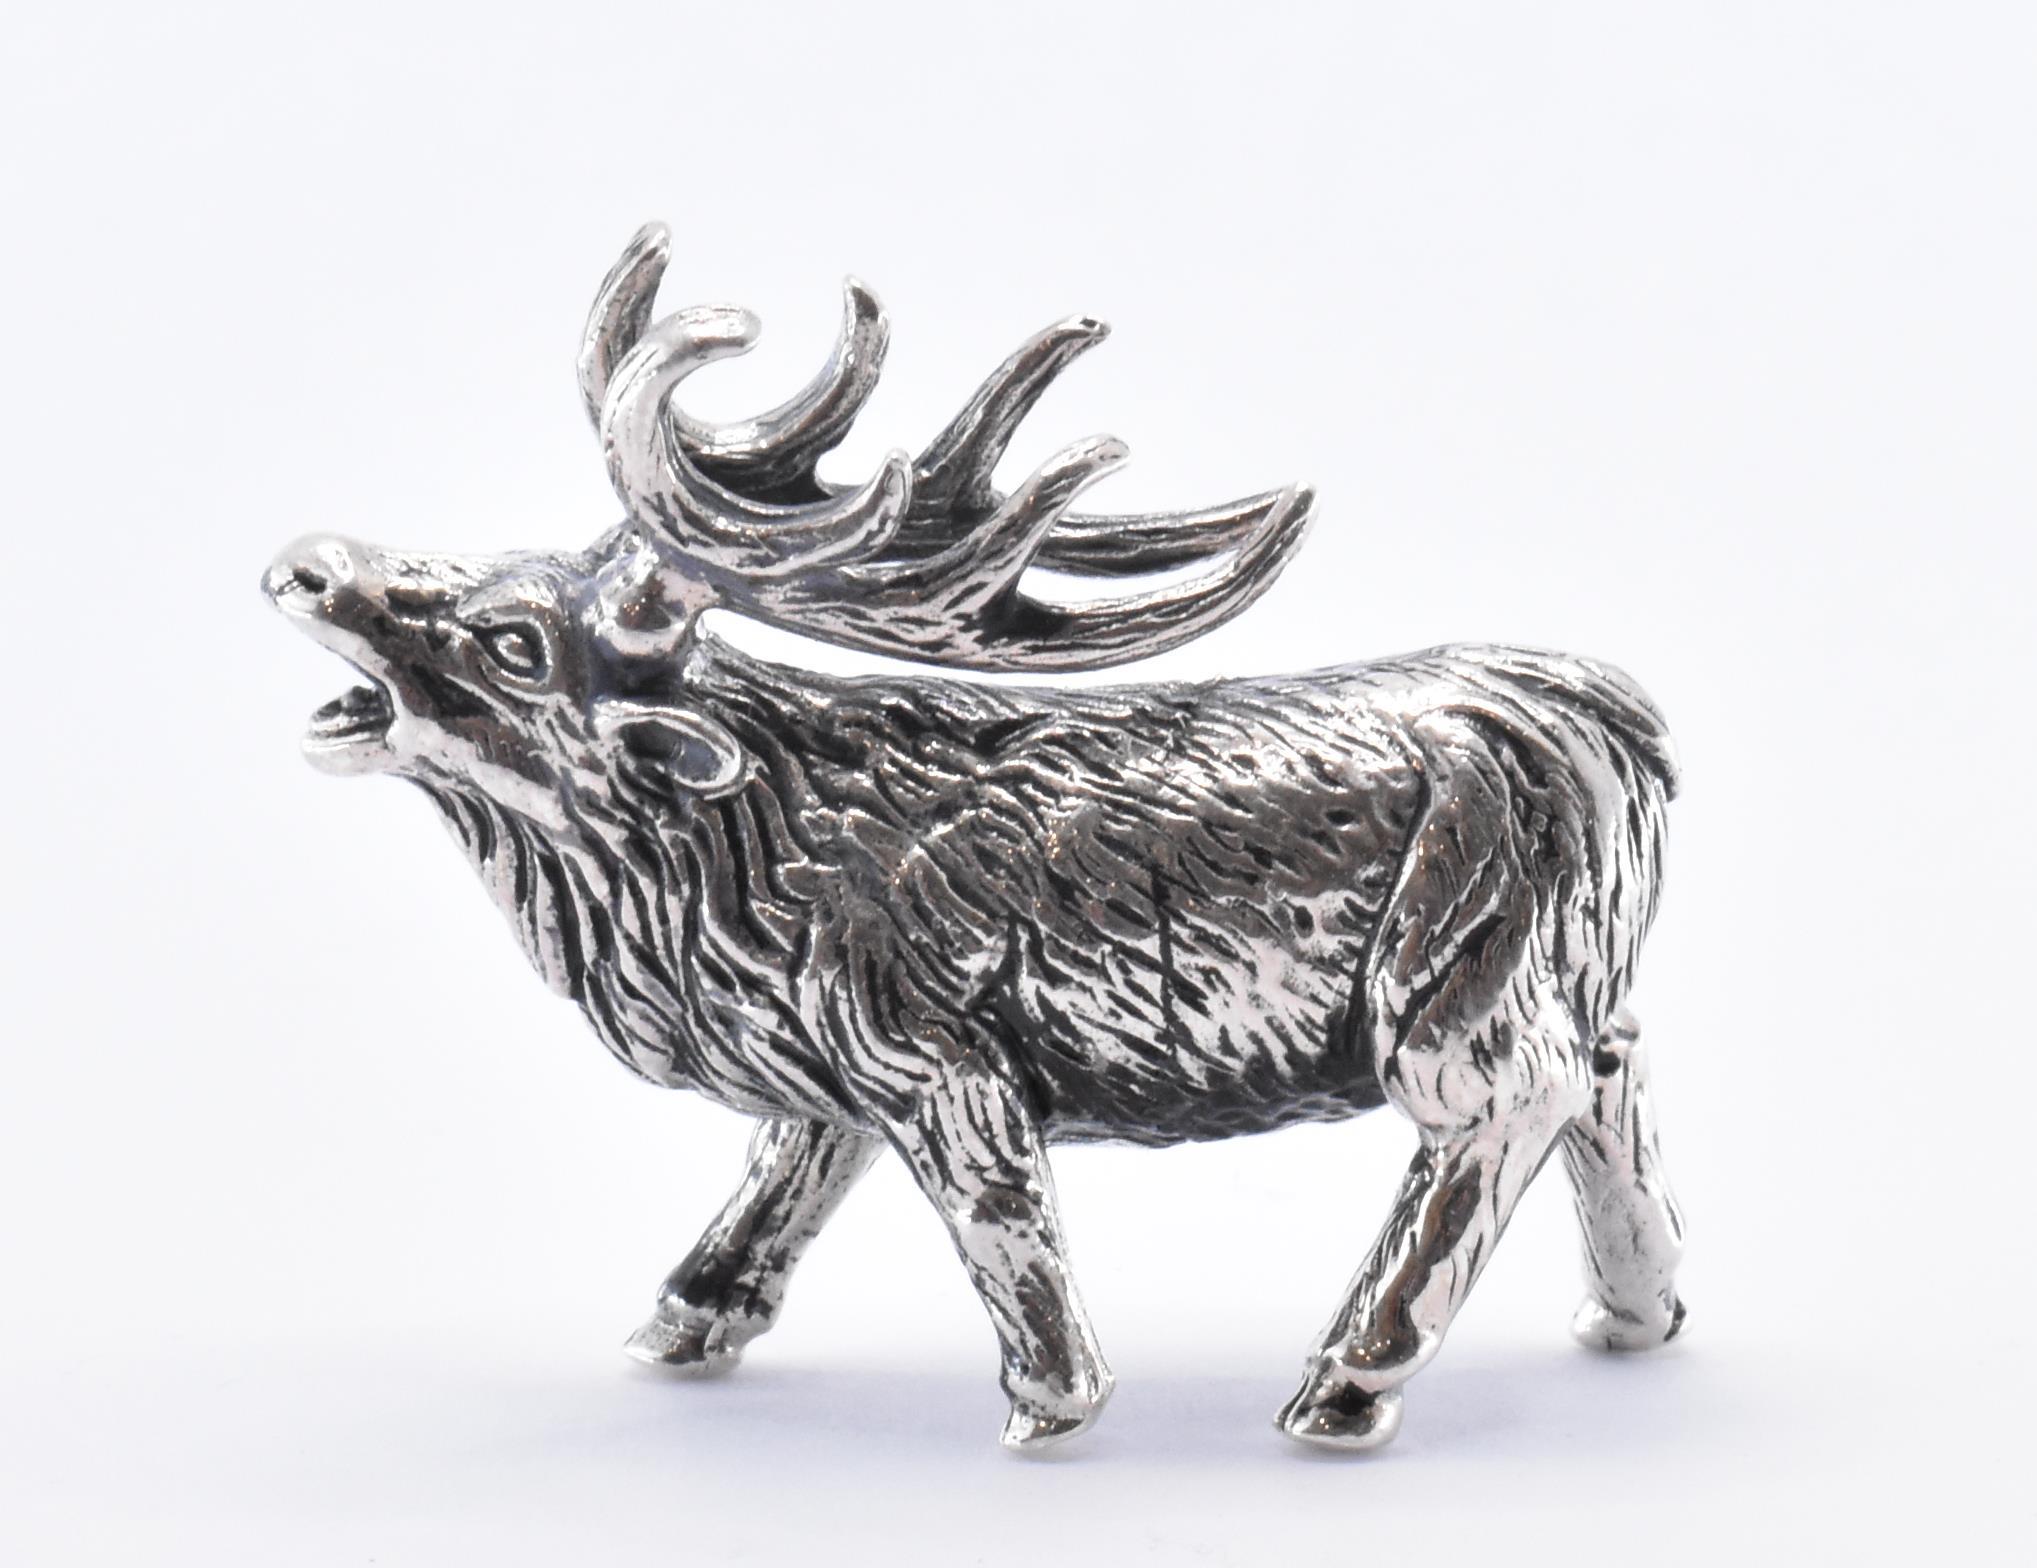 SILVER STAG FIGURINE - Image 5 of 5